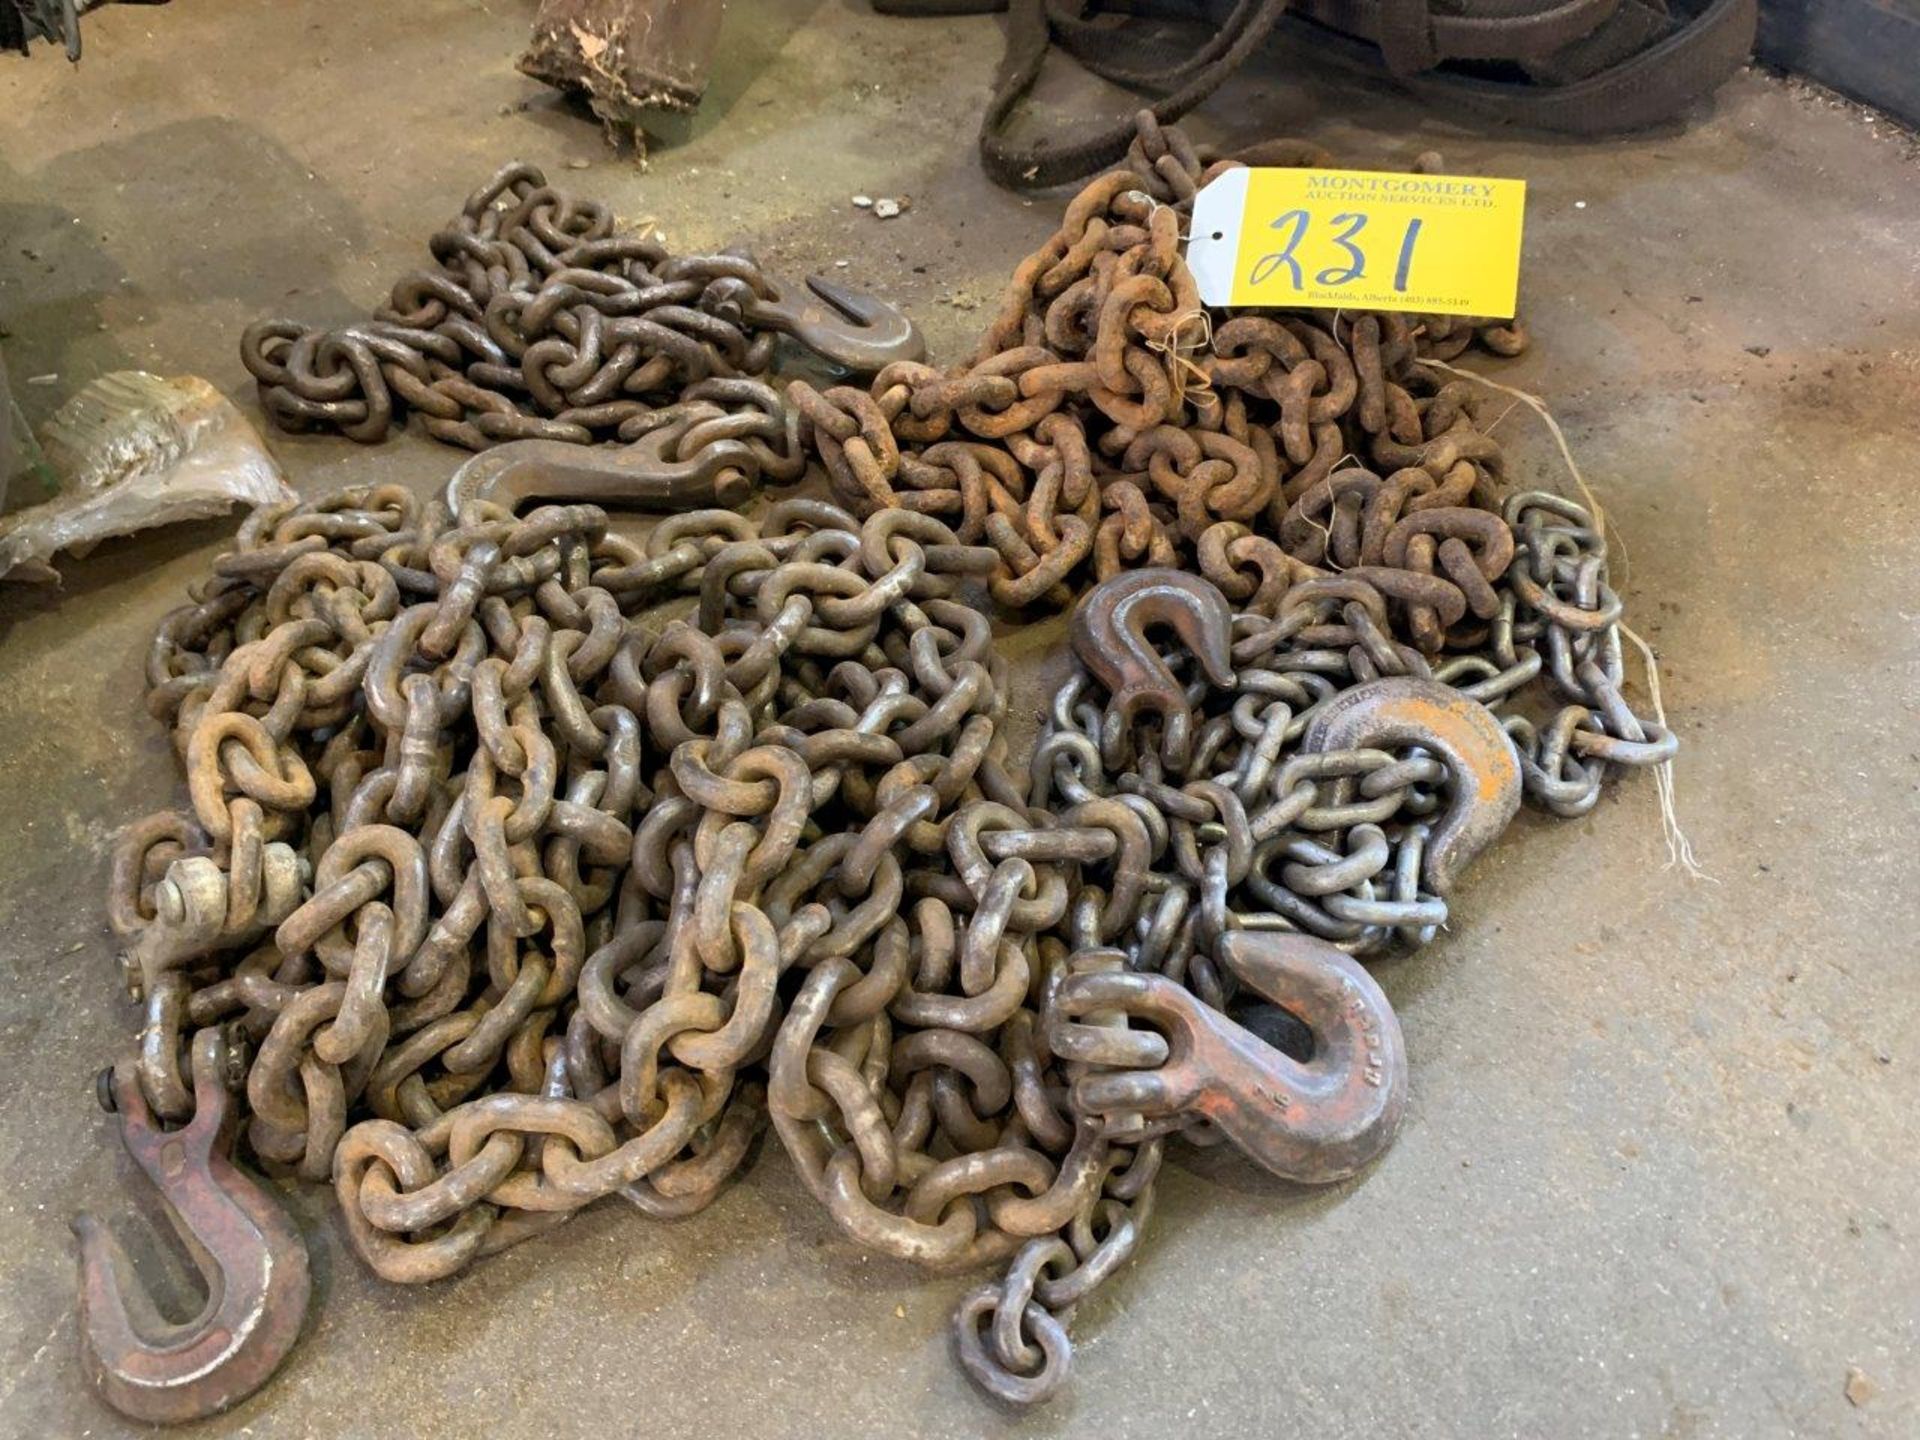 L/OASSORTED CHAINS AND HOOKS, WEB SLINGS - Image 2 of 3